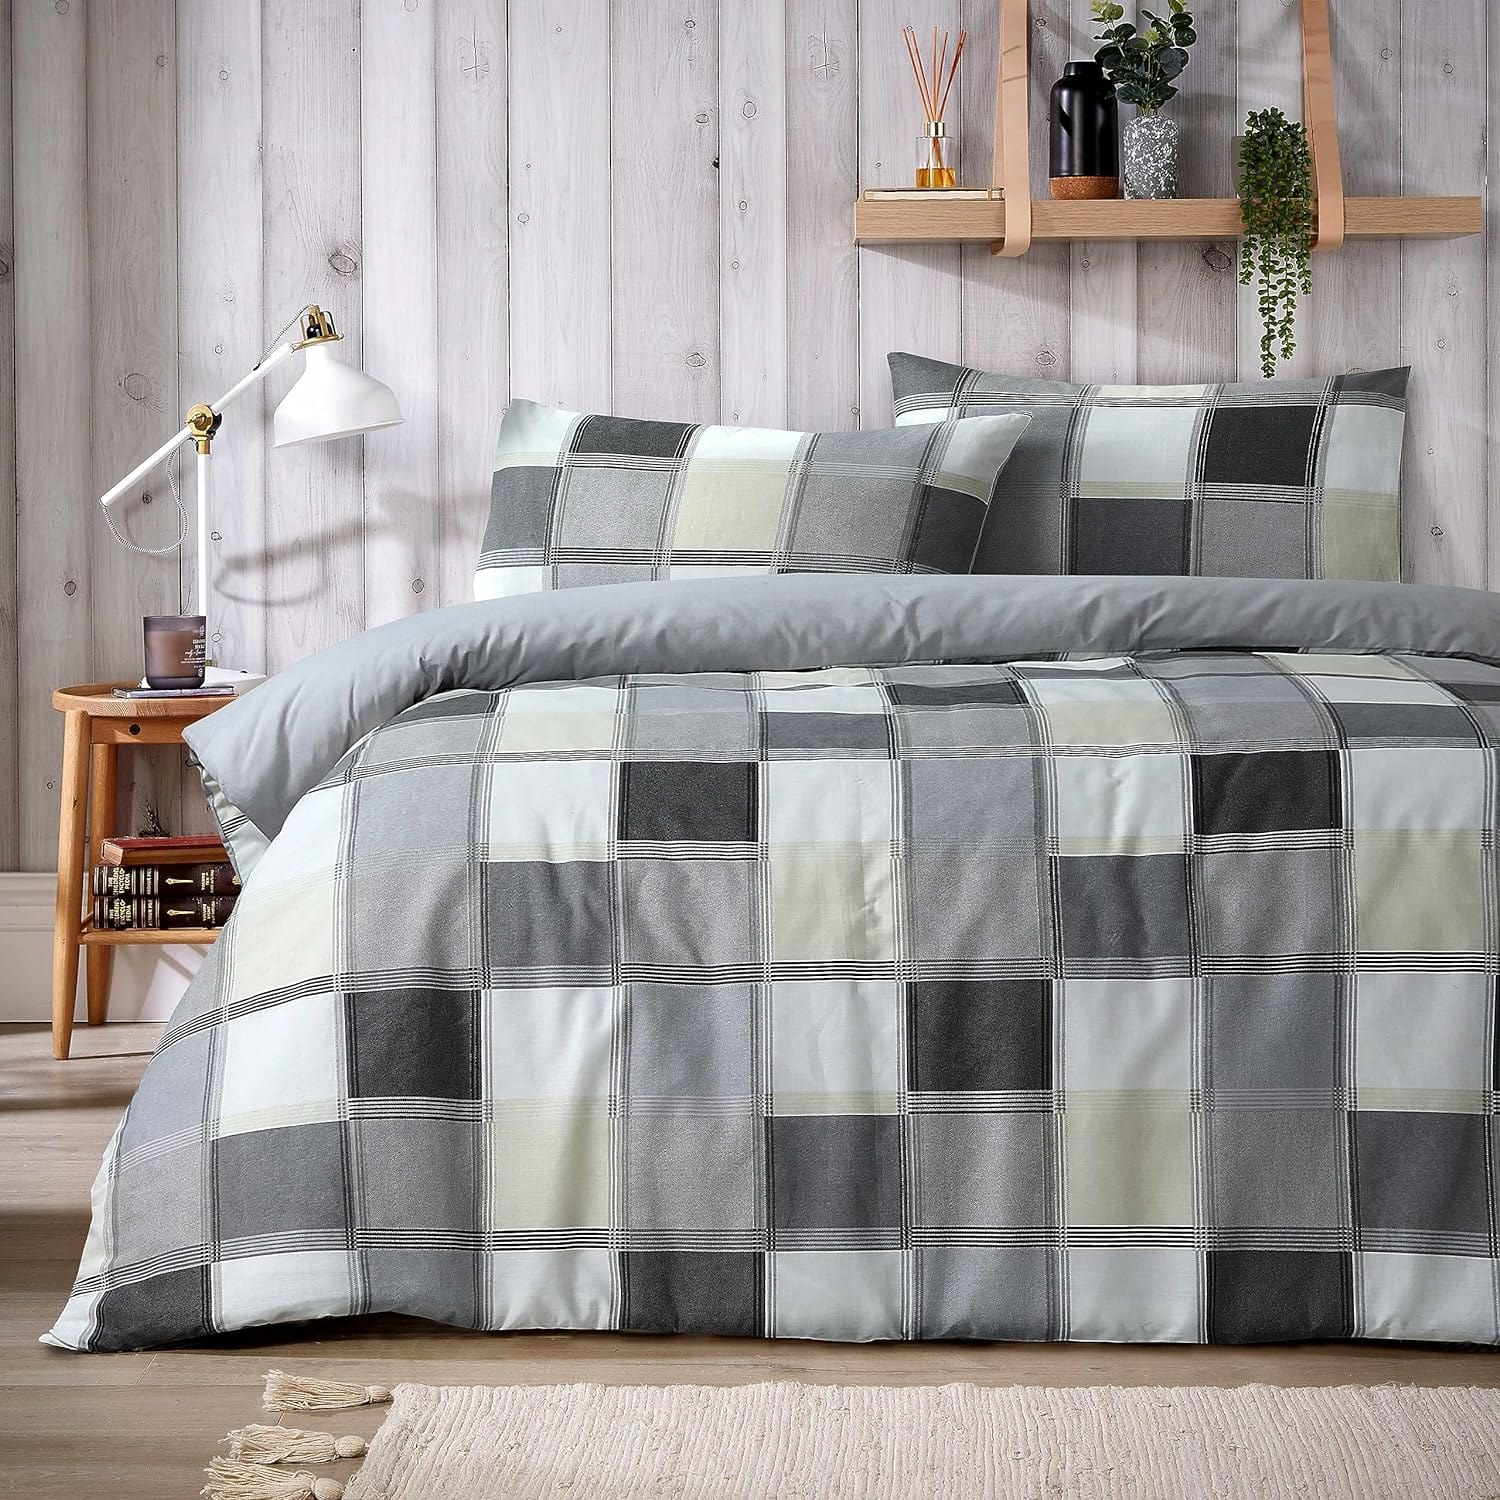 Glencoe Check Duvet Cover Set Easy Care Bedding Quilt Covers with Pillowcases OLIVIA ROCCO Glencoe Check Duvet Cover Set